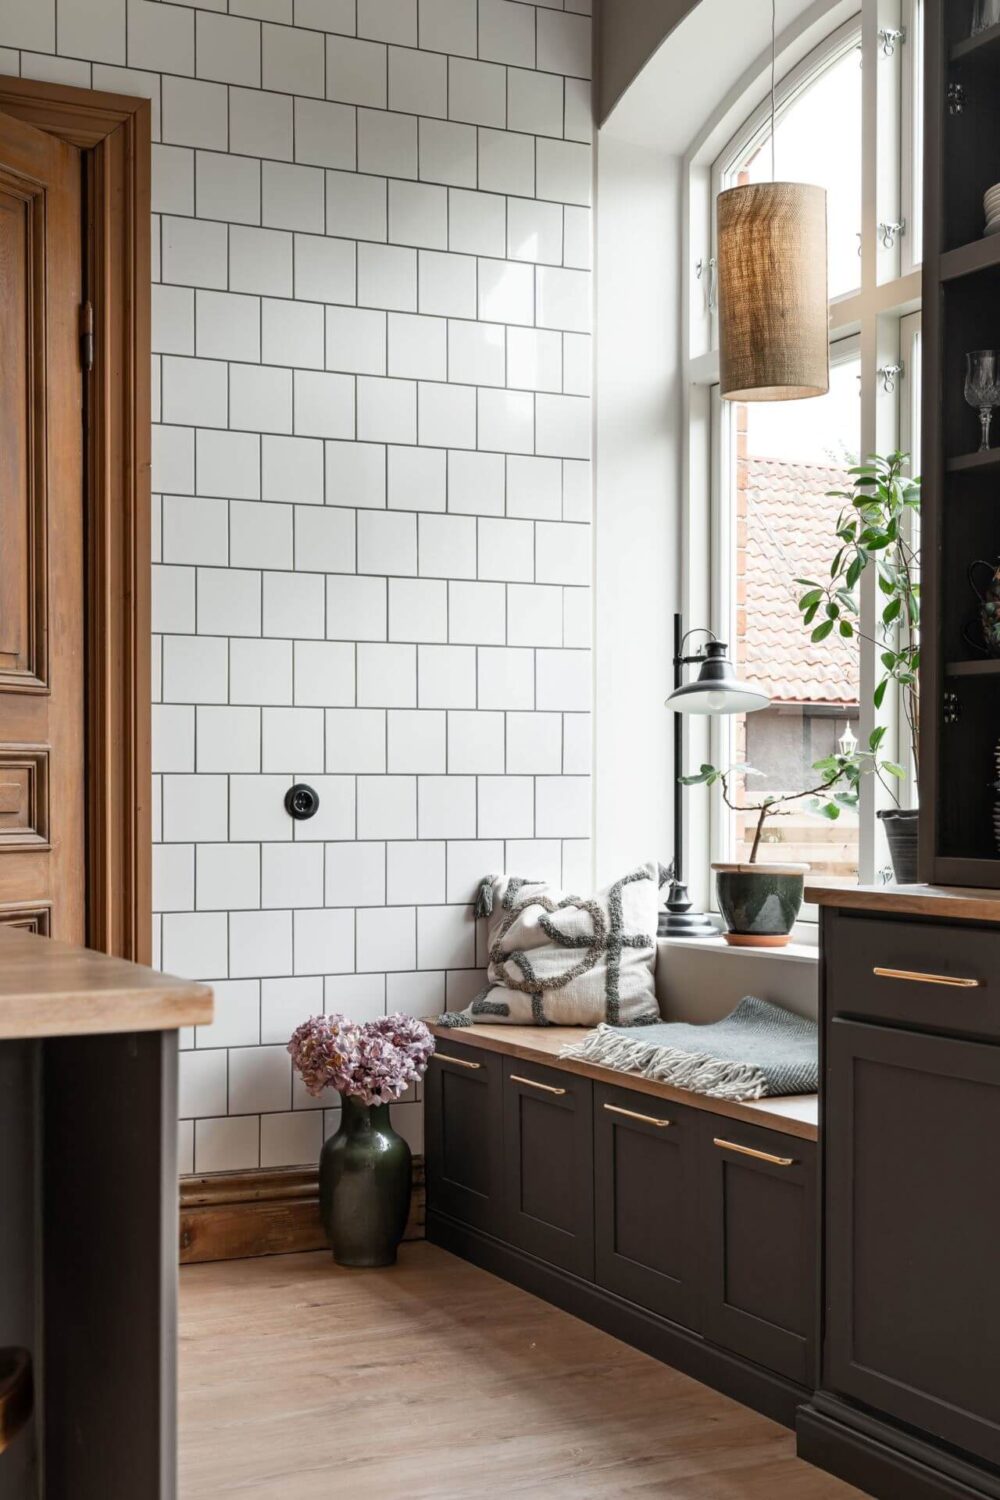 kitchen-window-seat-tiled-wall-nordroom